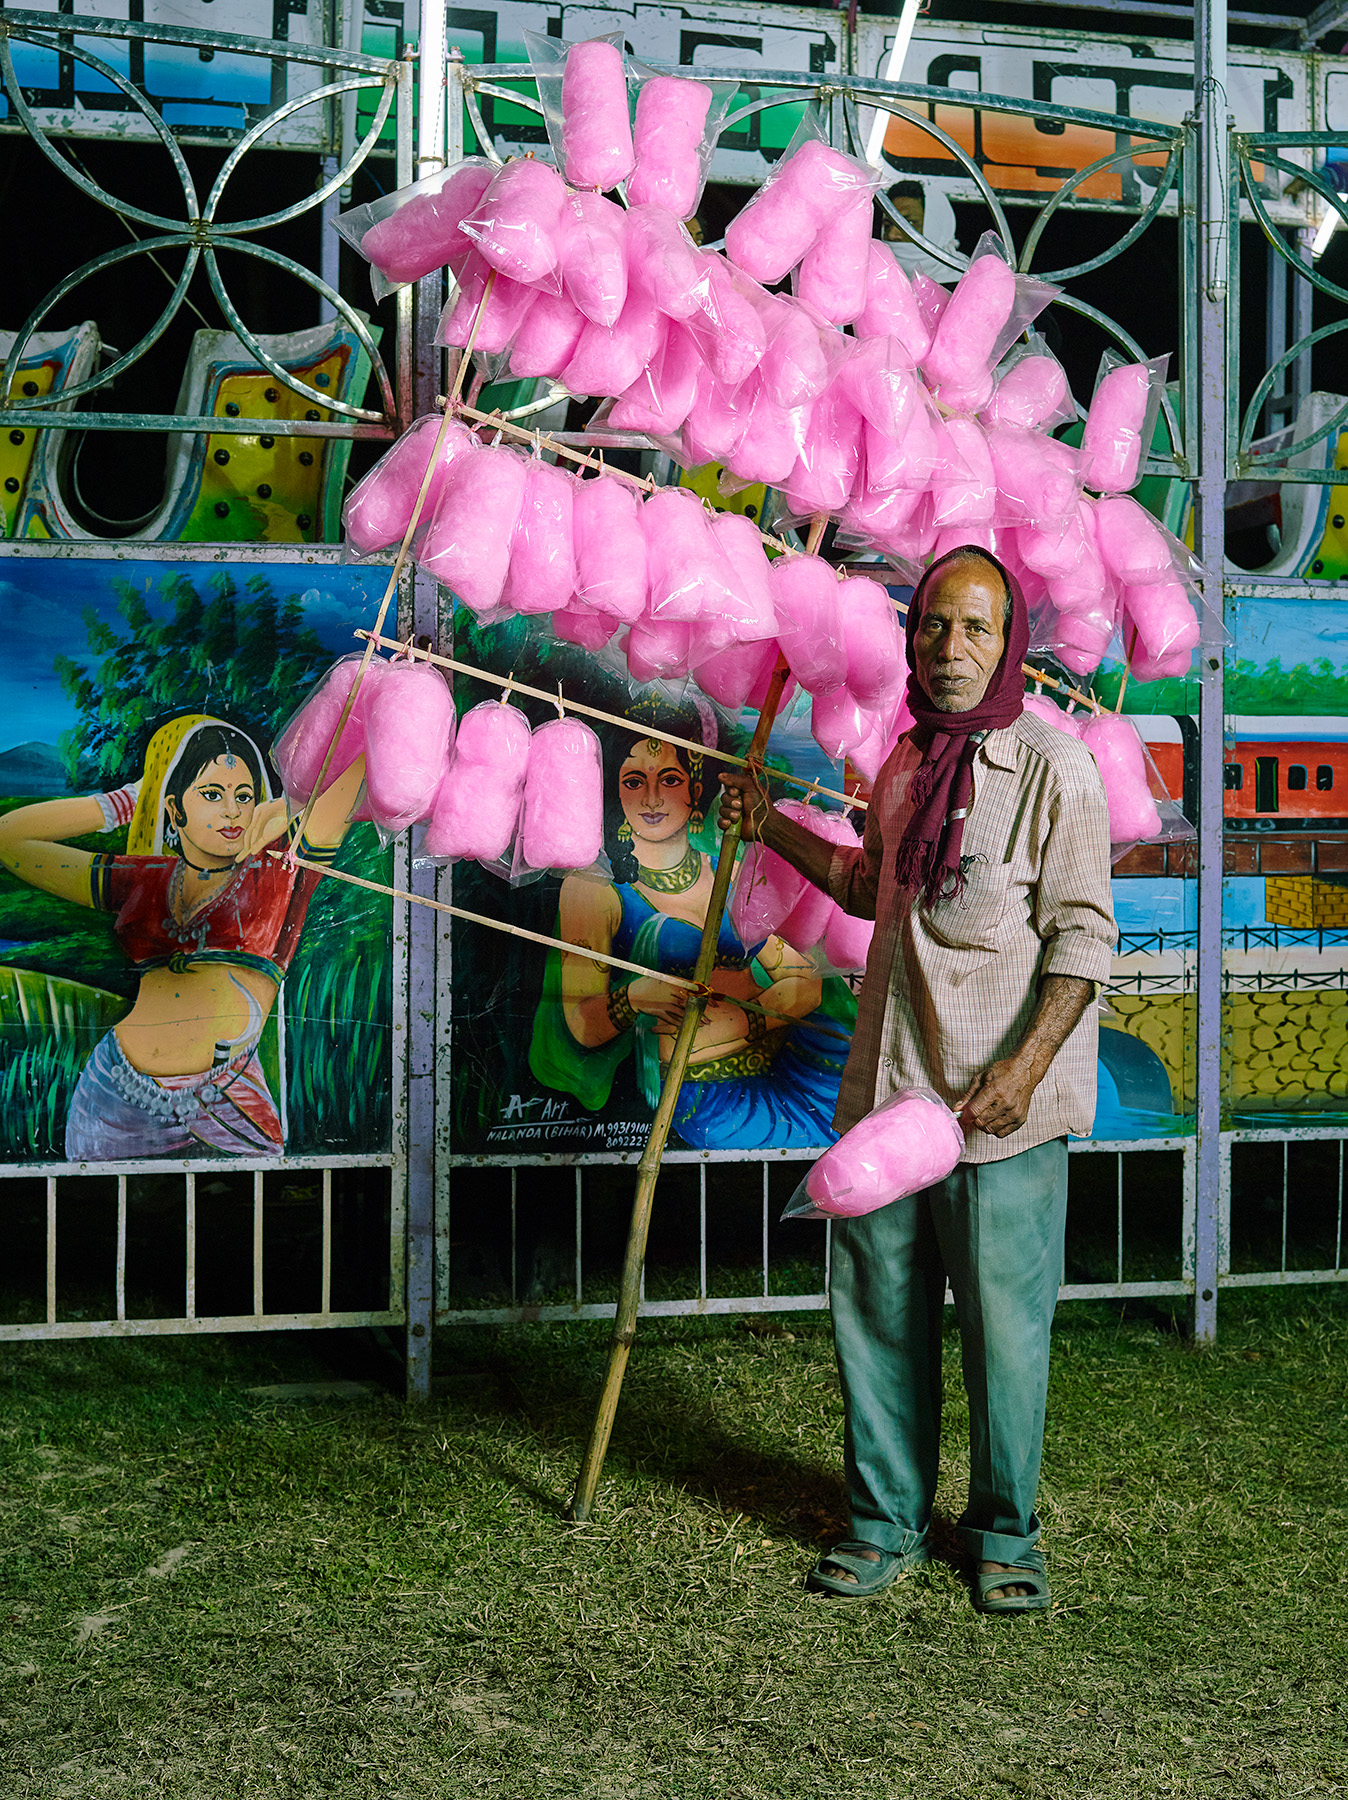 COTTON-CANDY SELLER, $16 WEEKLY, 2015